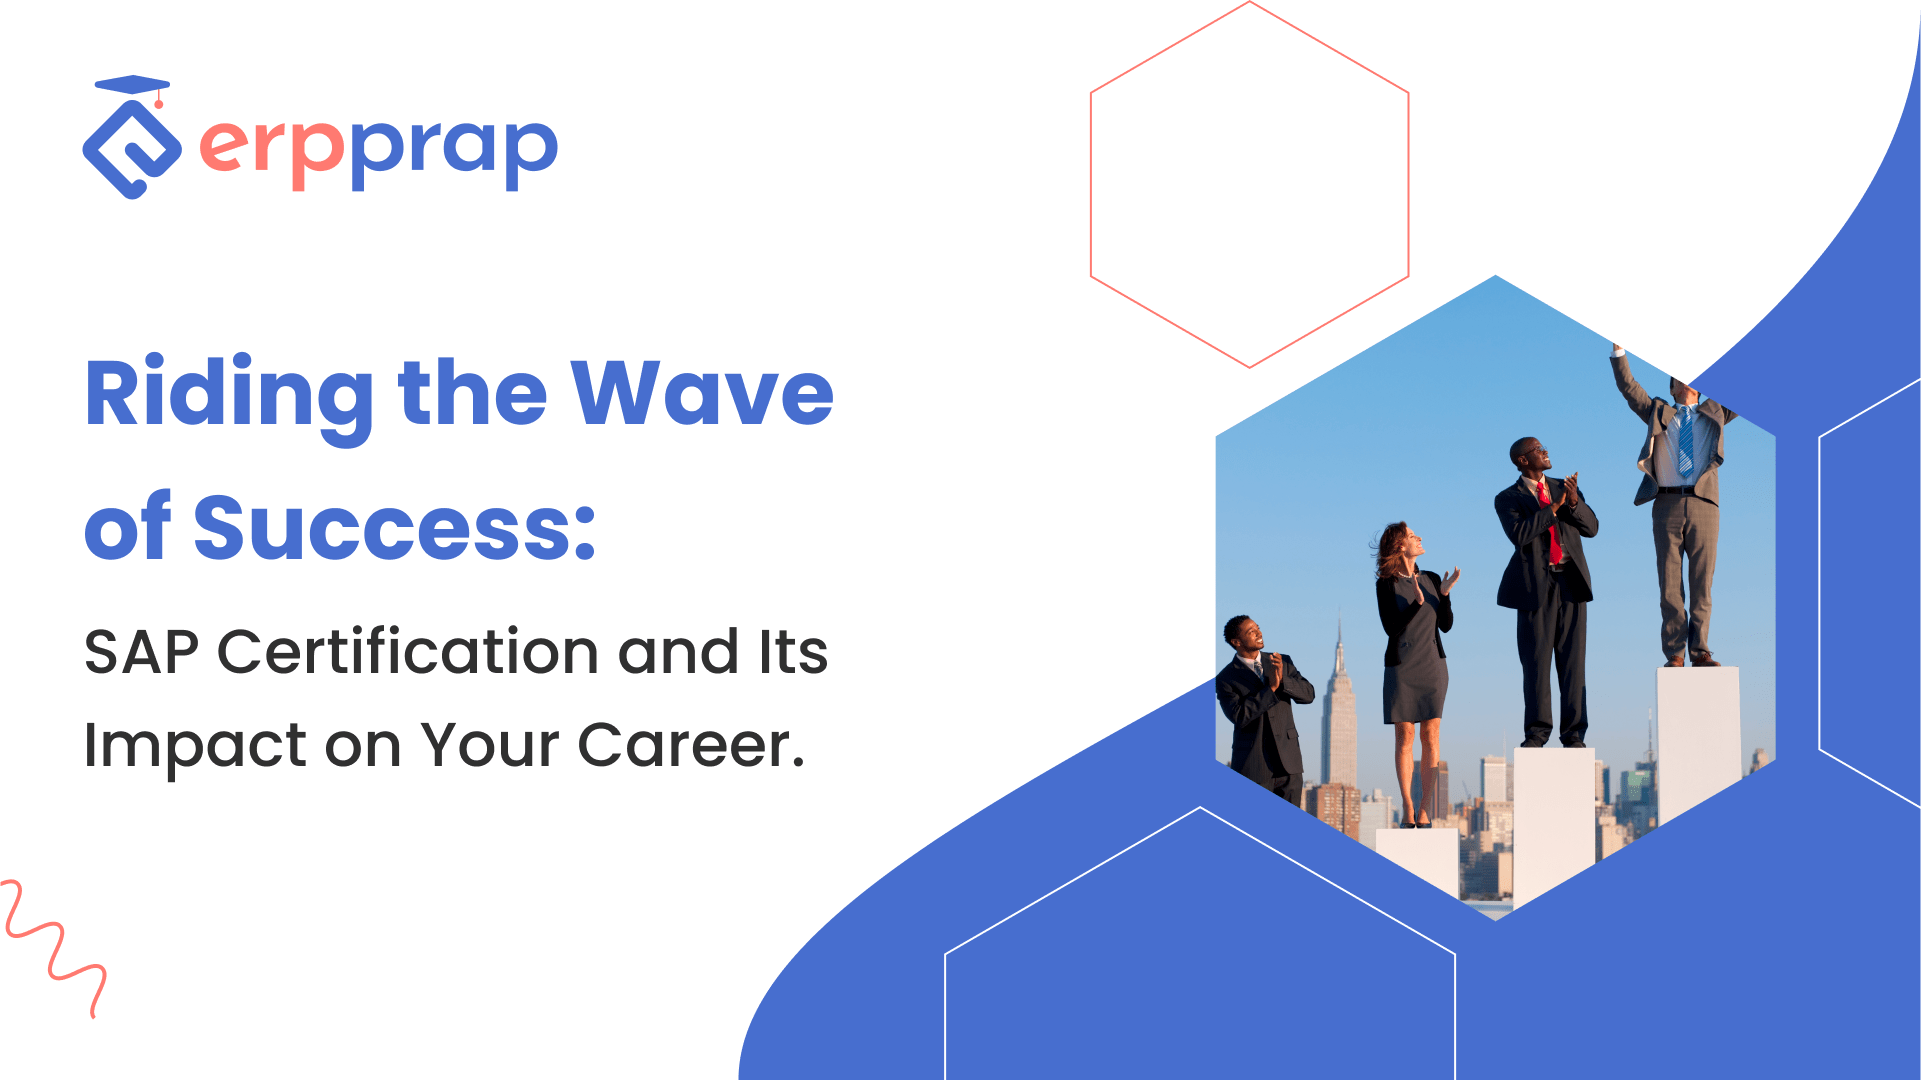 Riding the Wave of Success: SAP Certification and Its Impact on Your Career